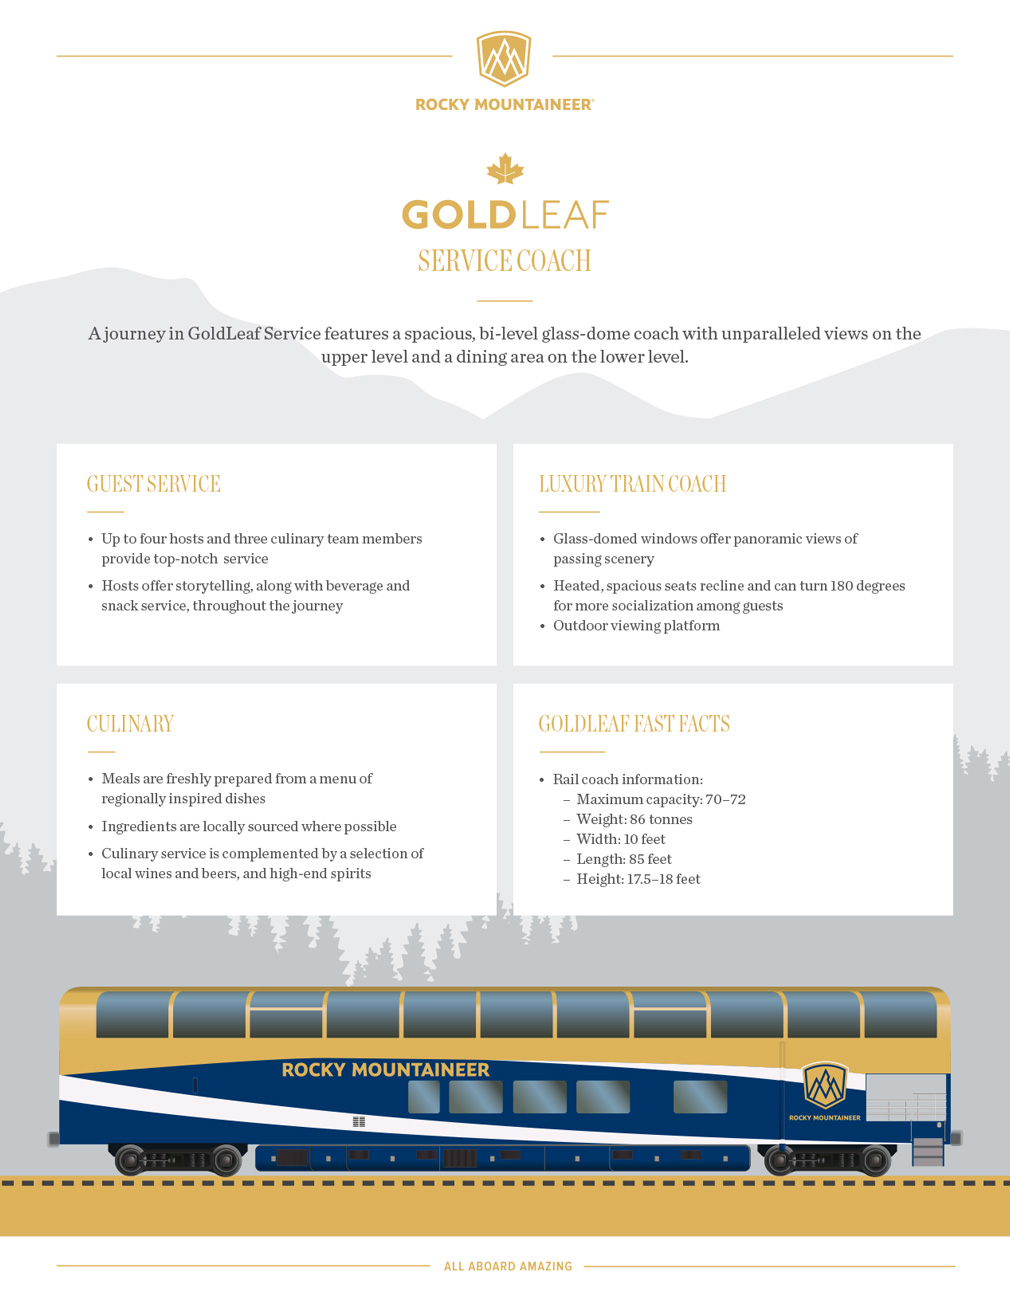 Rocky Mountaineer Gold Leaf Service